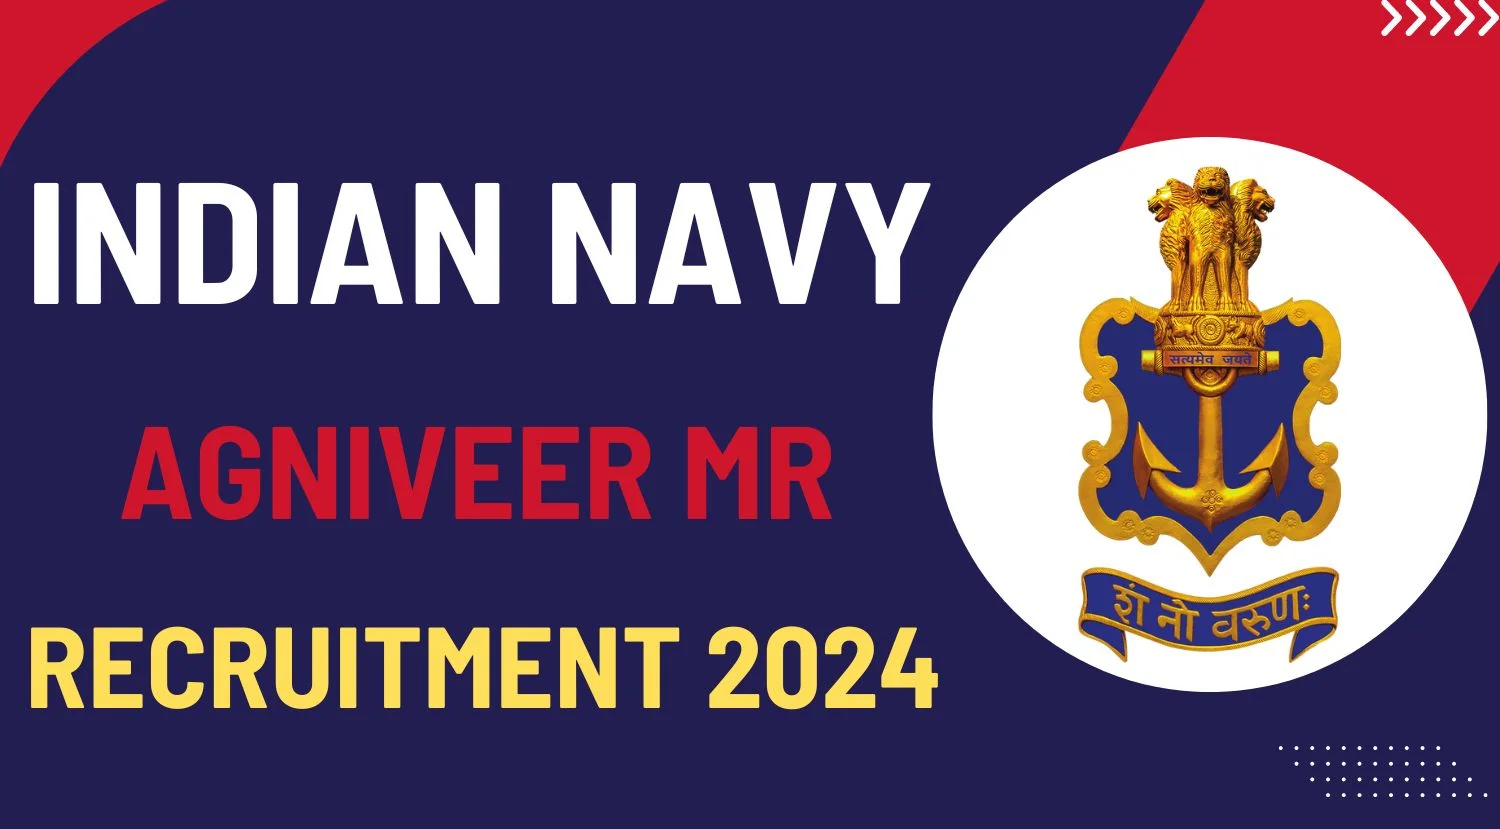 Indian Navy Agniveer MR Recruitment 2024 Notification Out Check Details Now